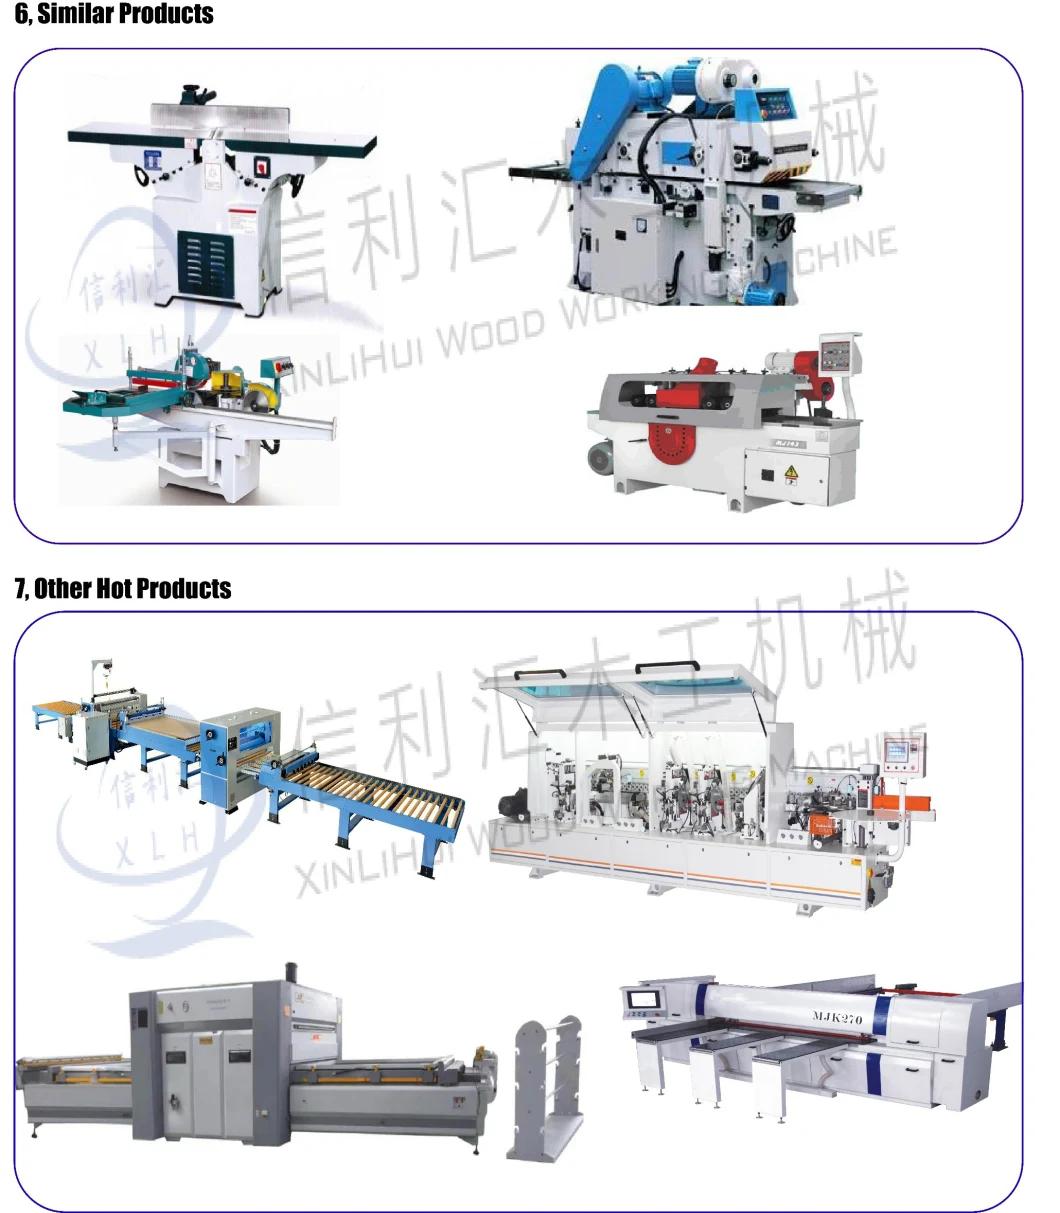 Automatic Power Feeder Milling Machine / Power Feeder for Woodworking/ 4 Roller 8 Speed Woodworking Machine Heavy Ring Power Feeder for Spindle Moulder